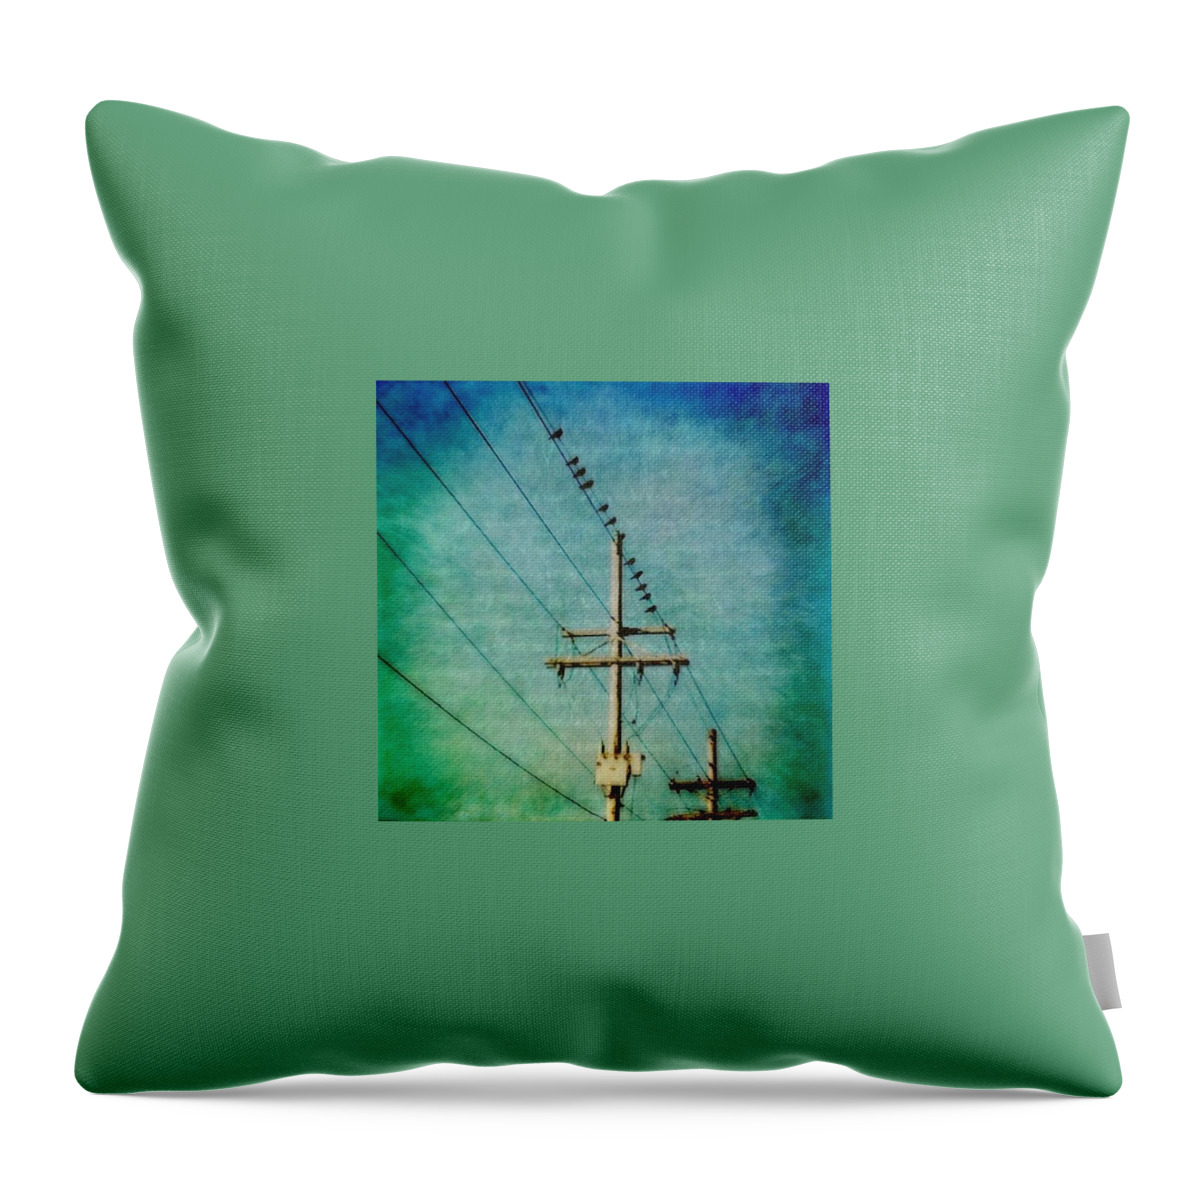 Birdsonaline Throw Pillow featuring the photograph Birds on a Line by Joan McCool